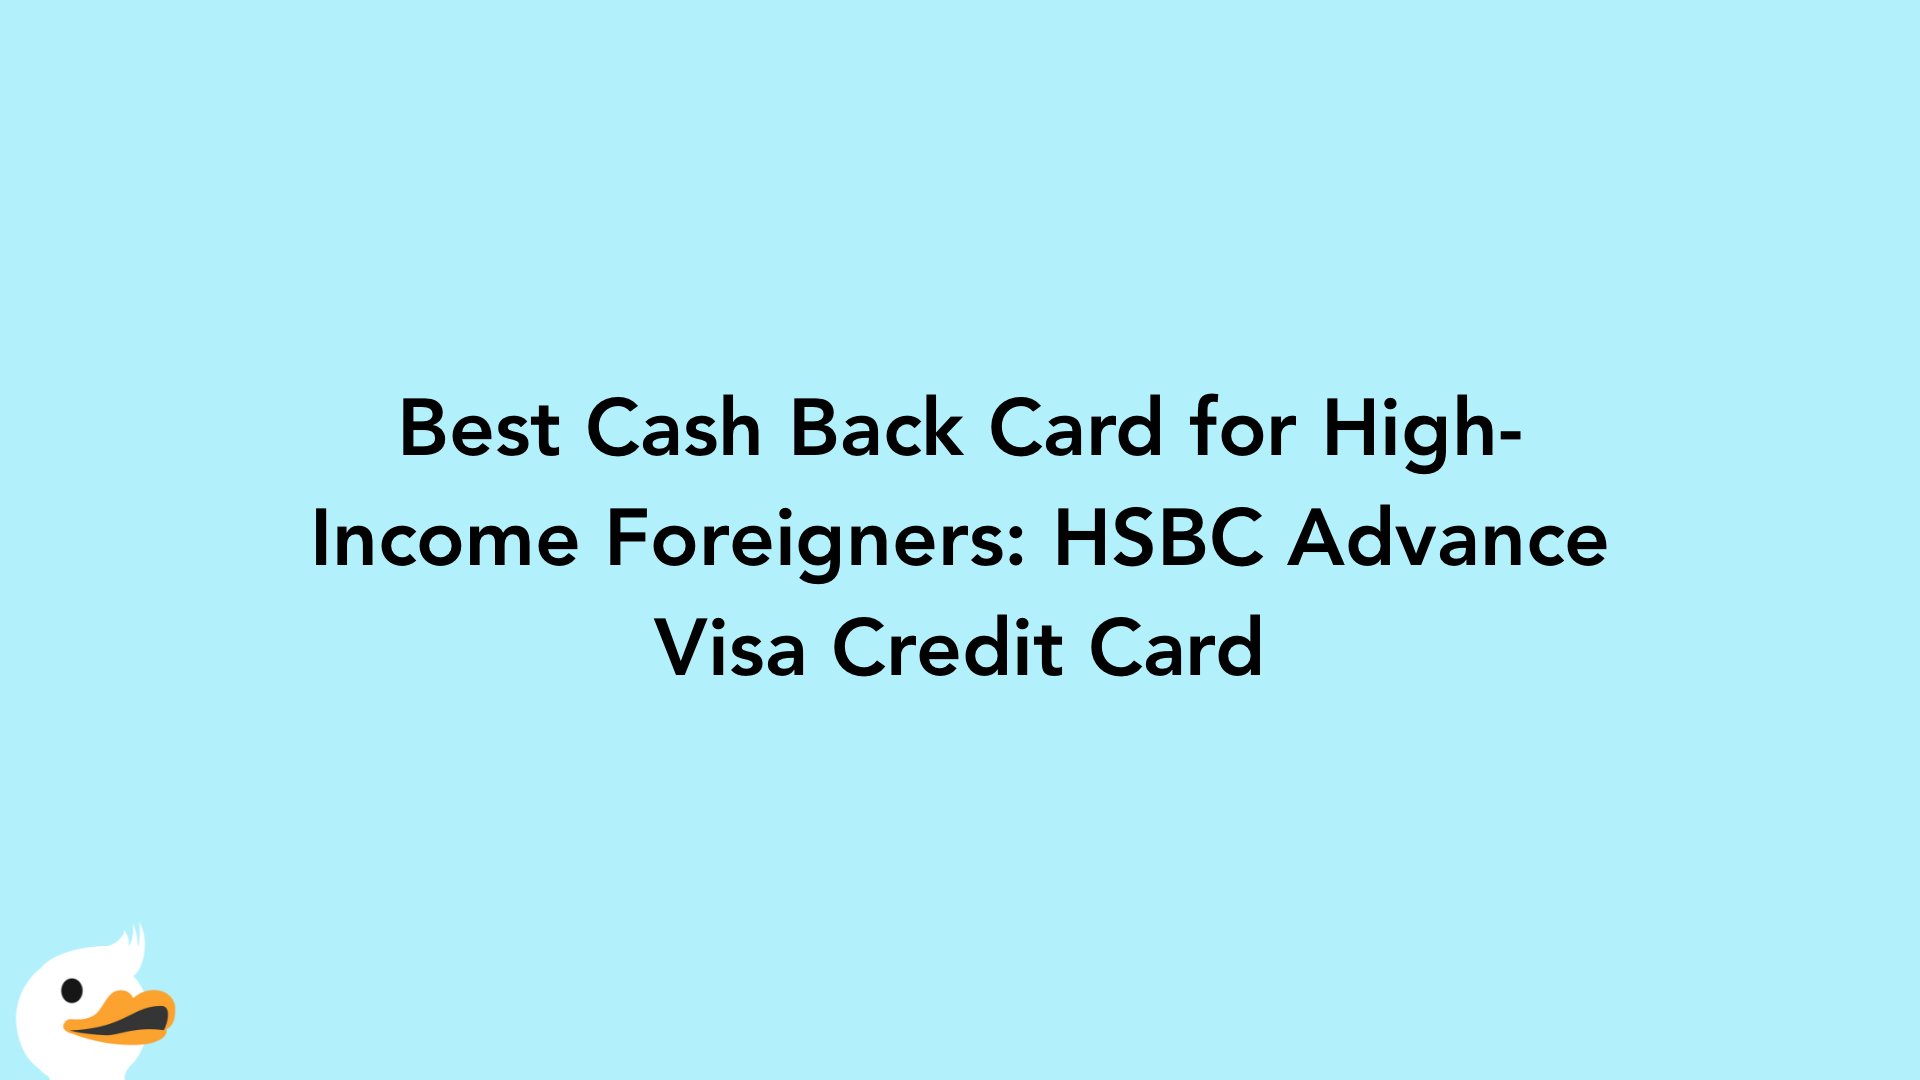 Best Cash Back Card for High-Income Foreigners: HSBC Advance Visa Credit Card